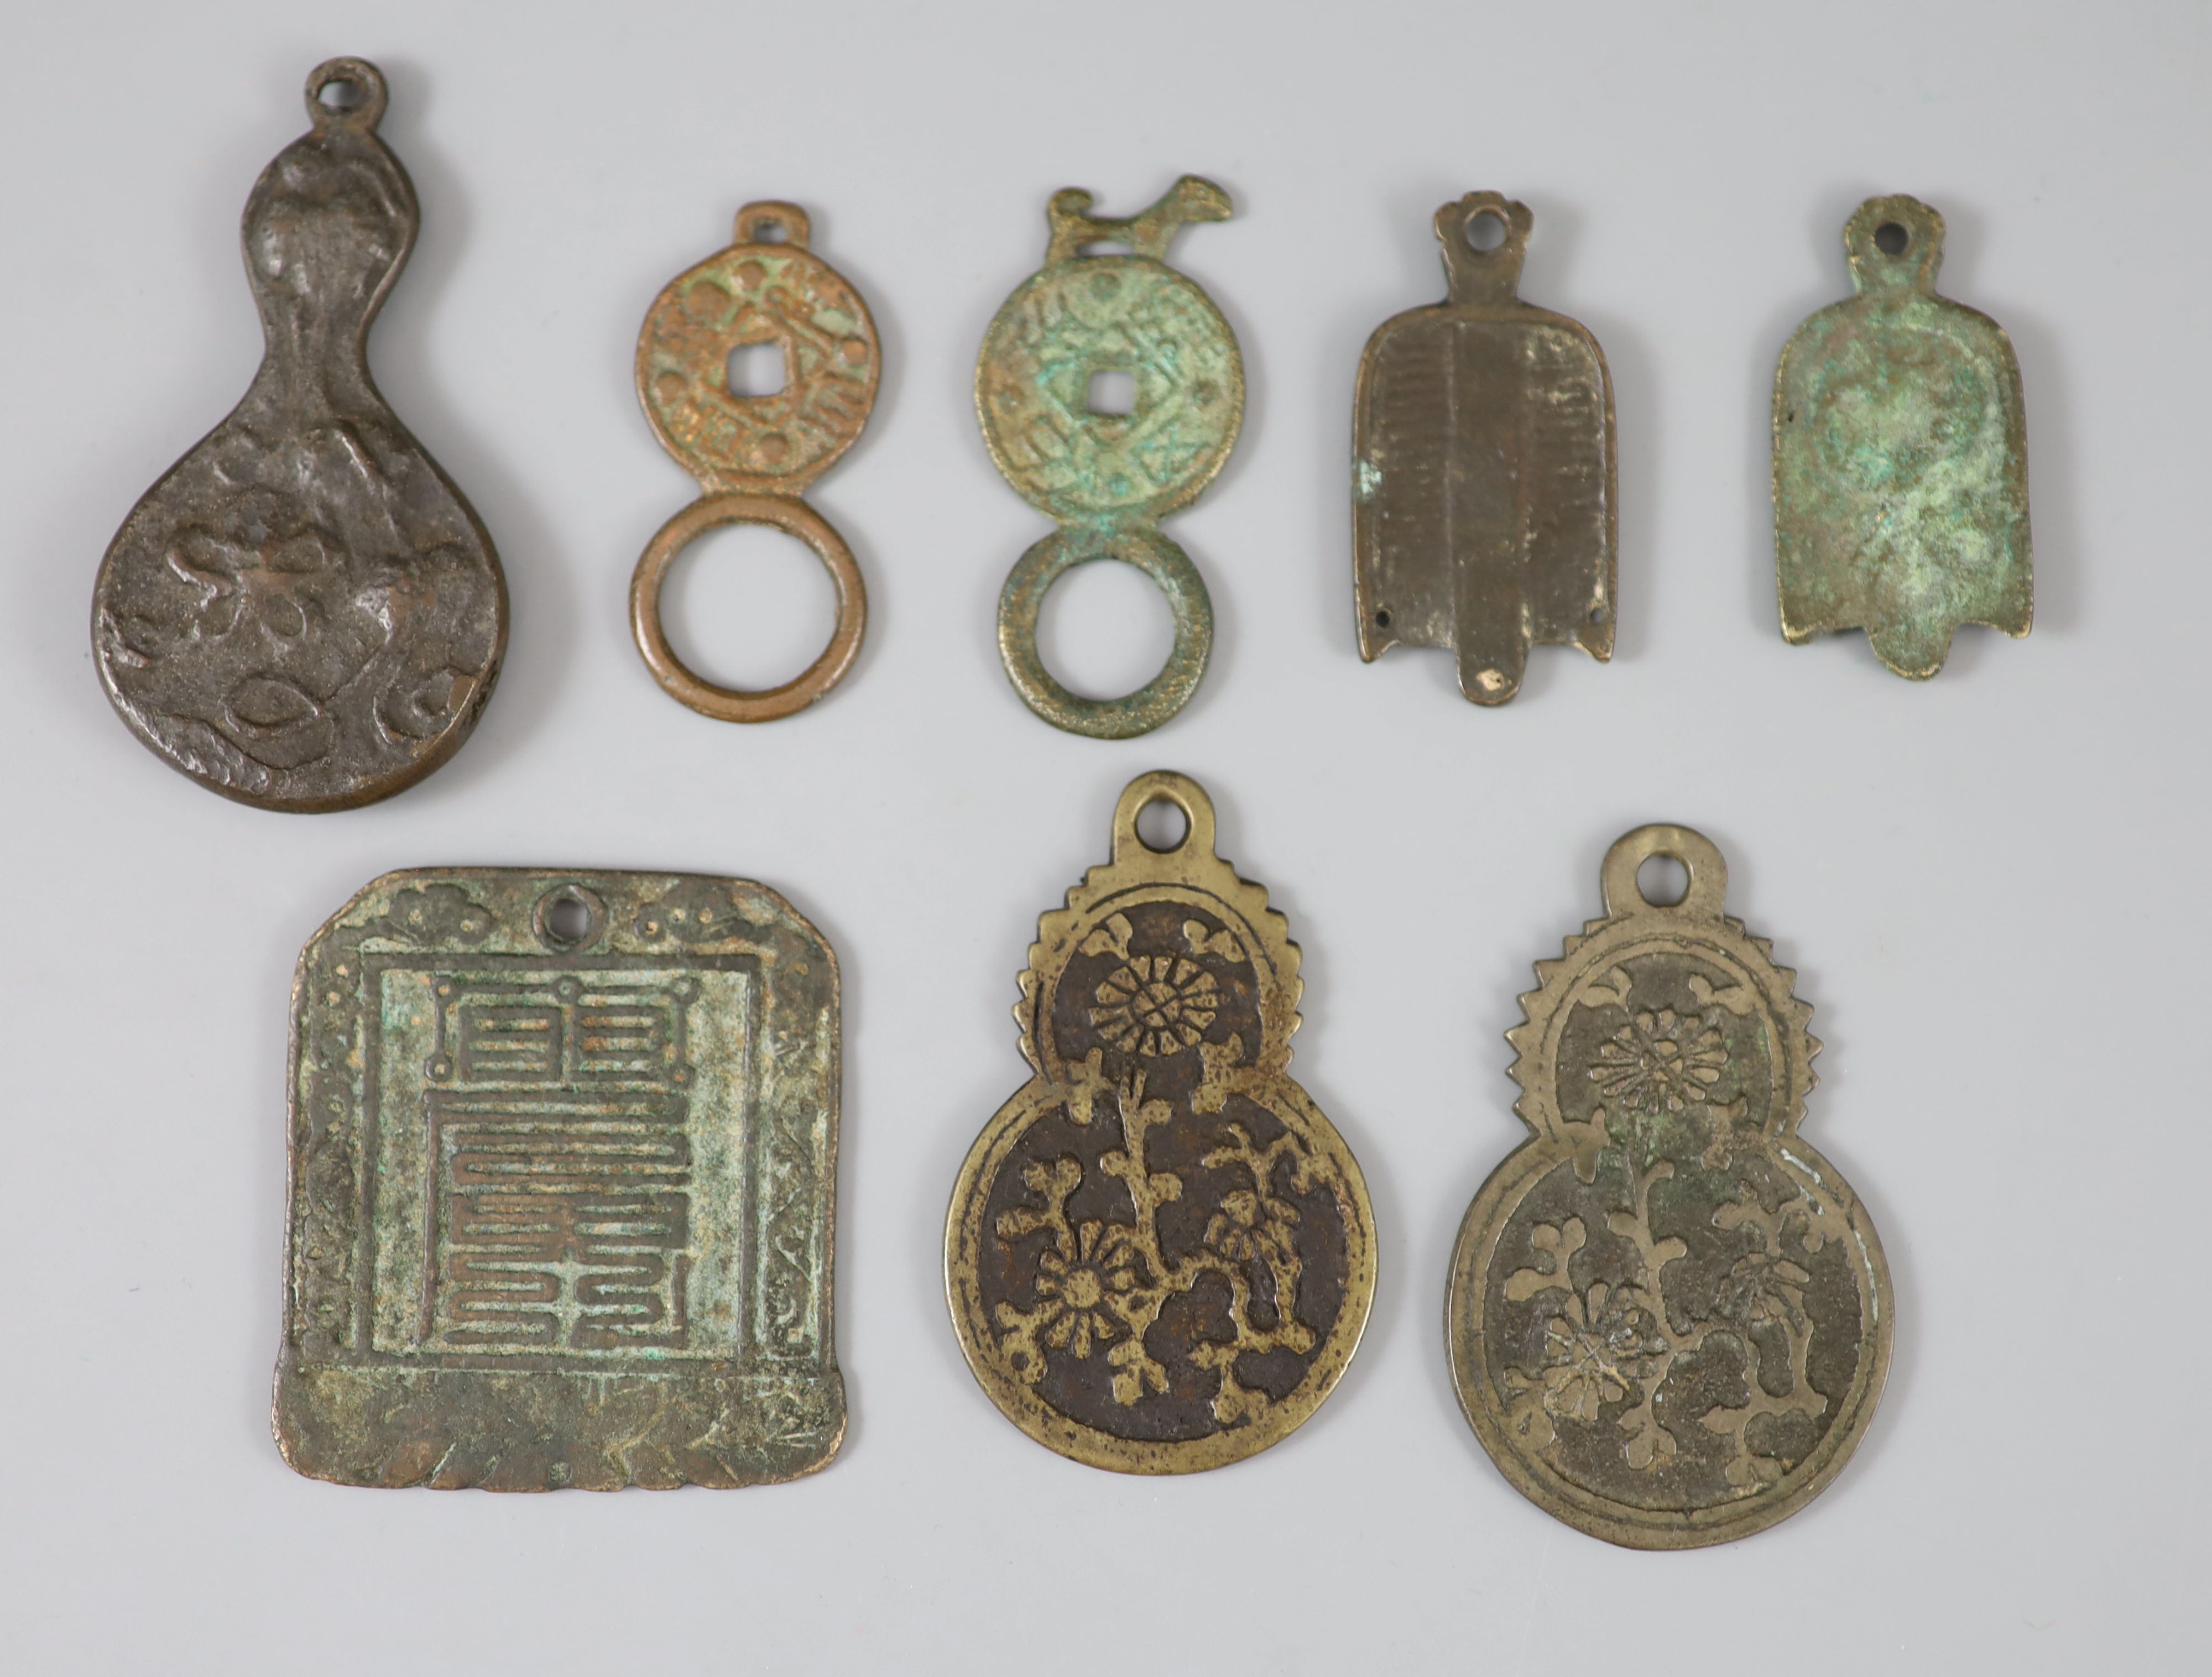 China, 8 bronze charms or amulets, Qing dynasty or earlier,